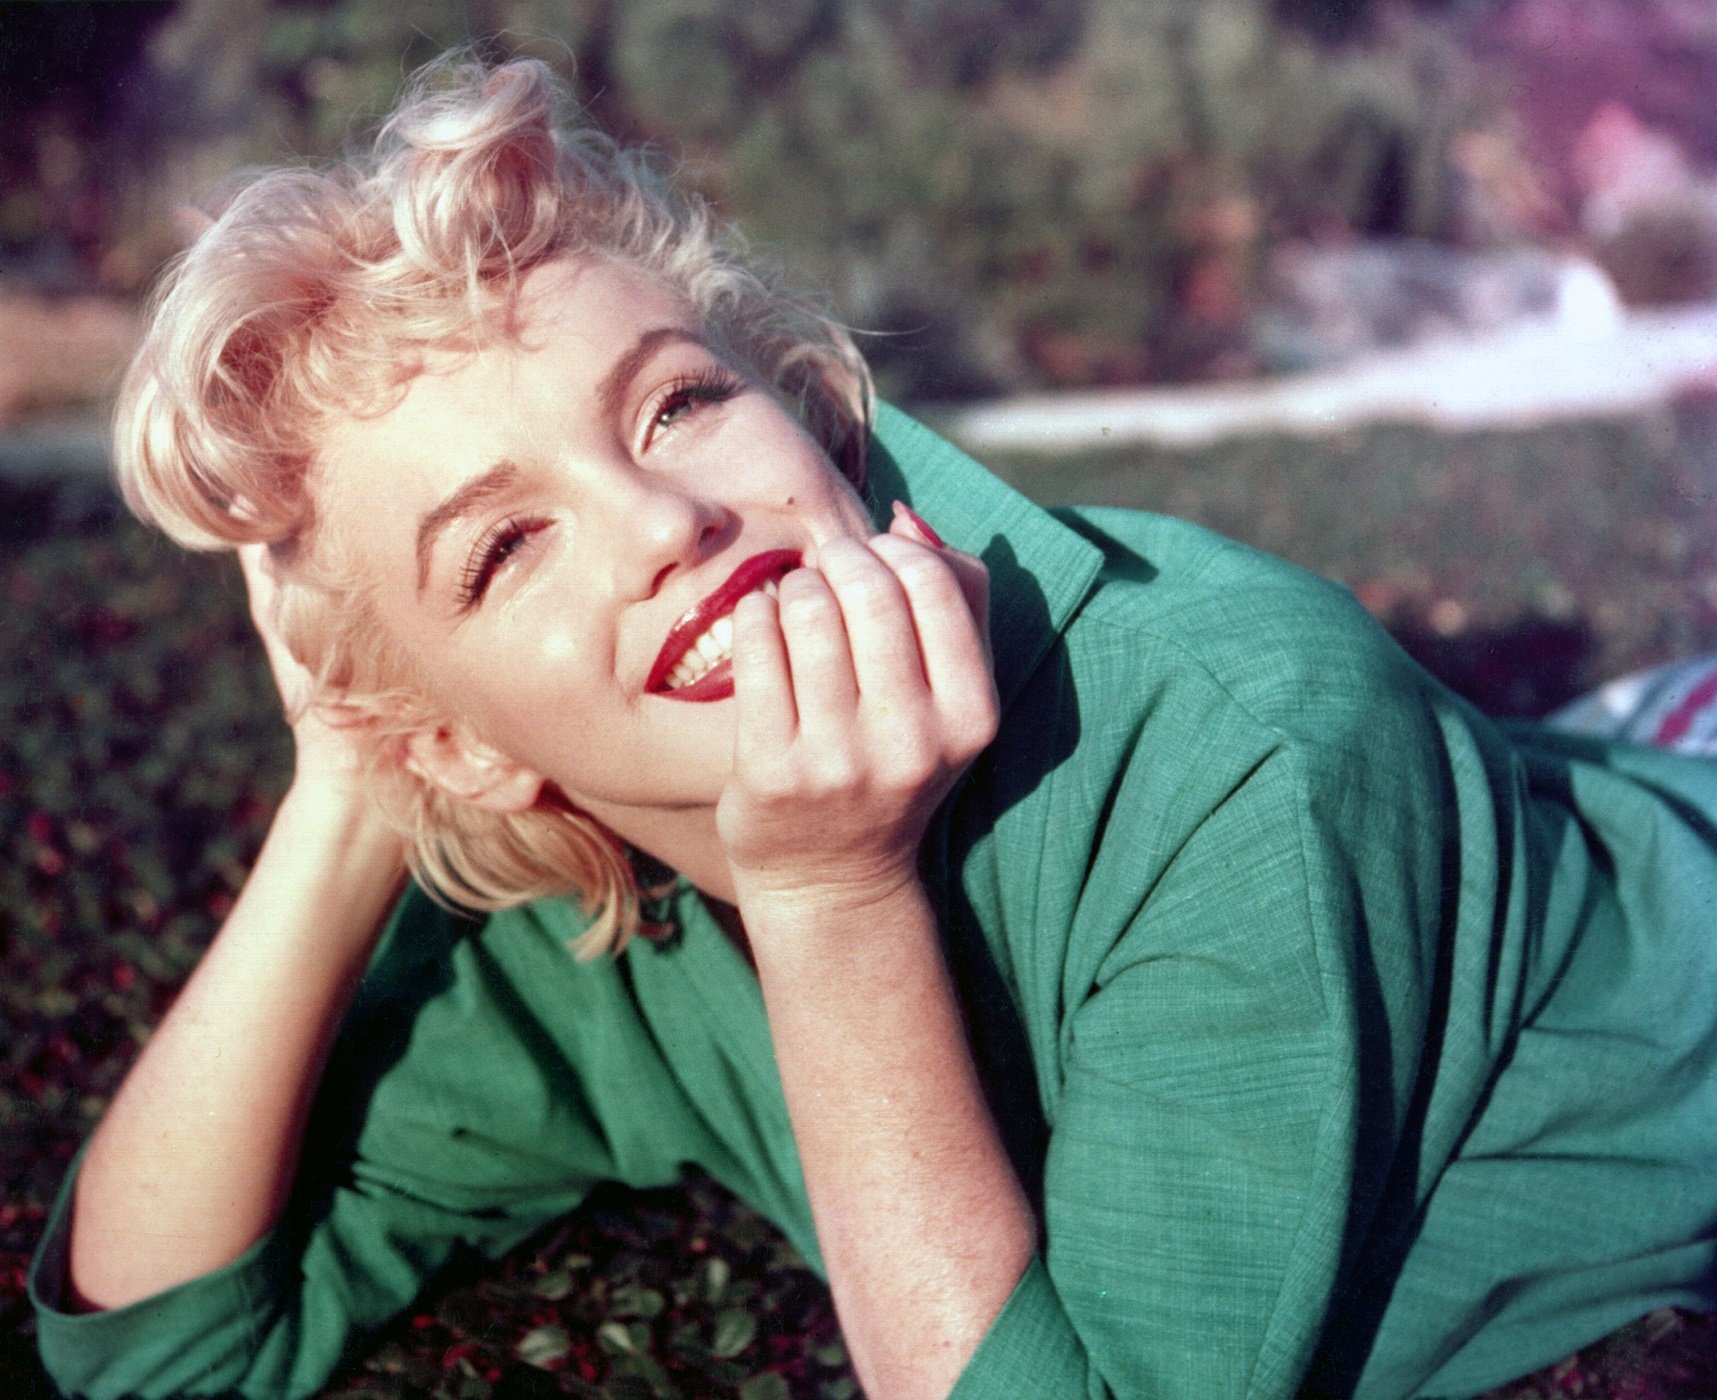  Marilyn Monroe poses for a portrait laying on the grass in 1954 in Palm Springs, California